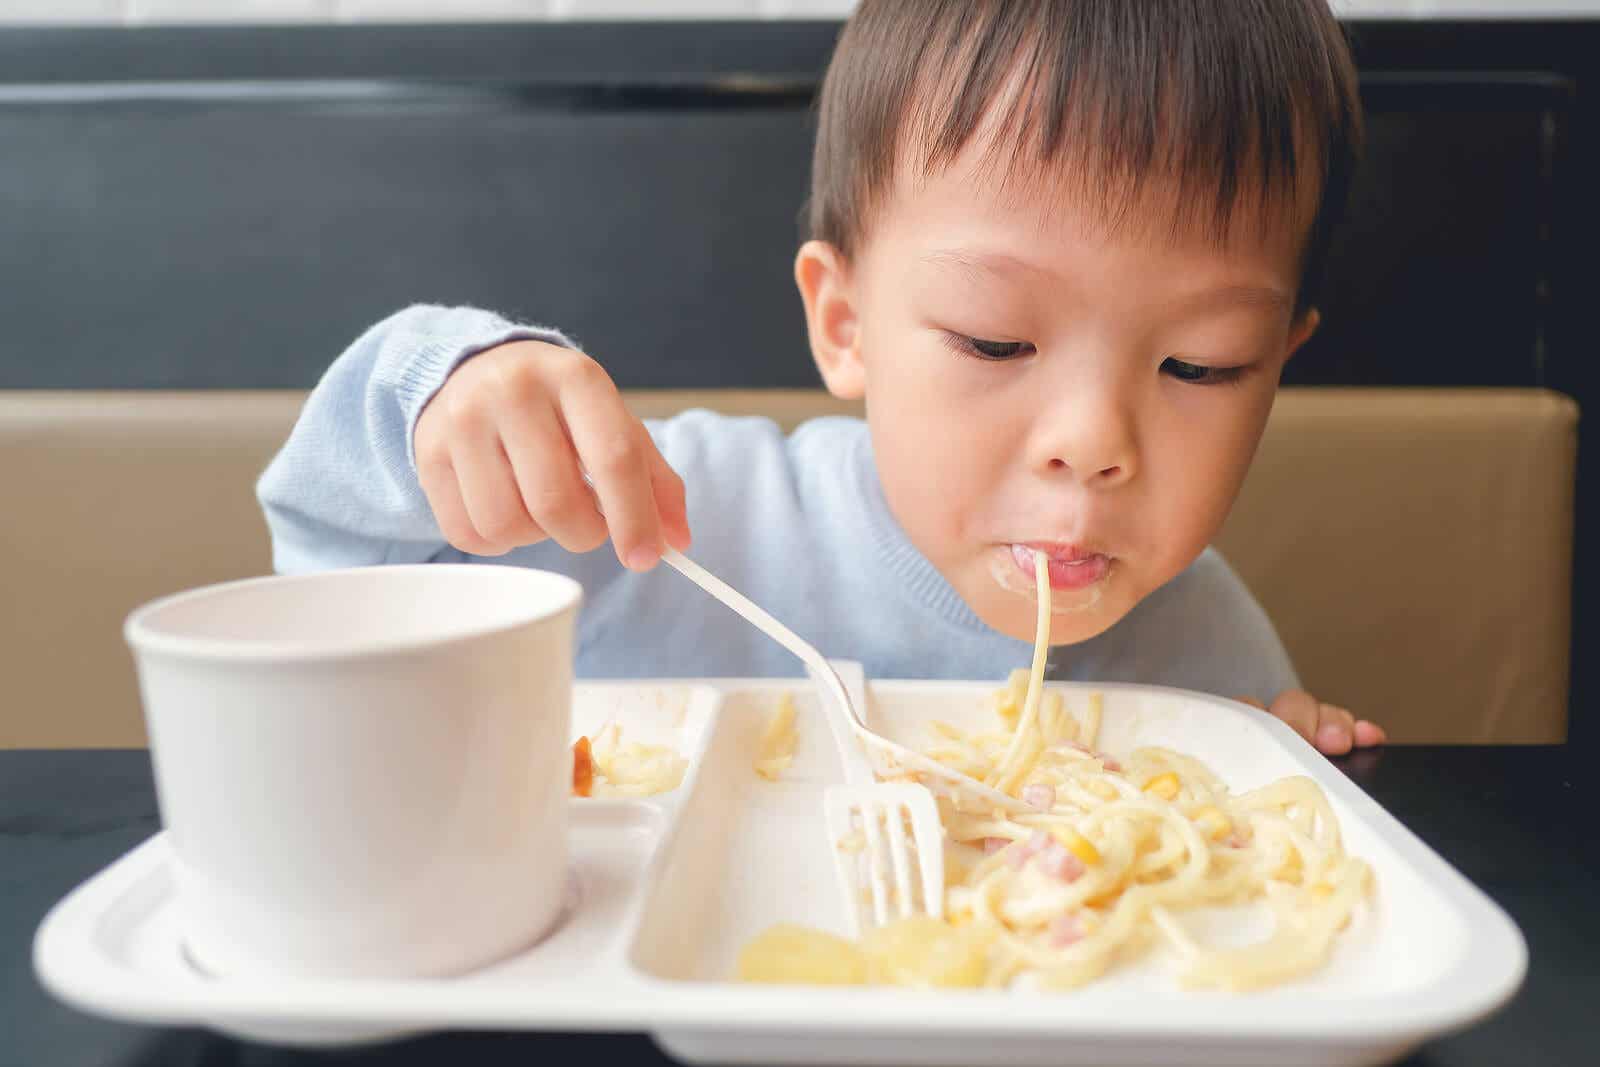 A small child eating pasta.